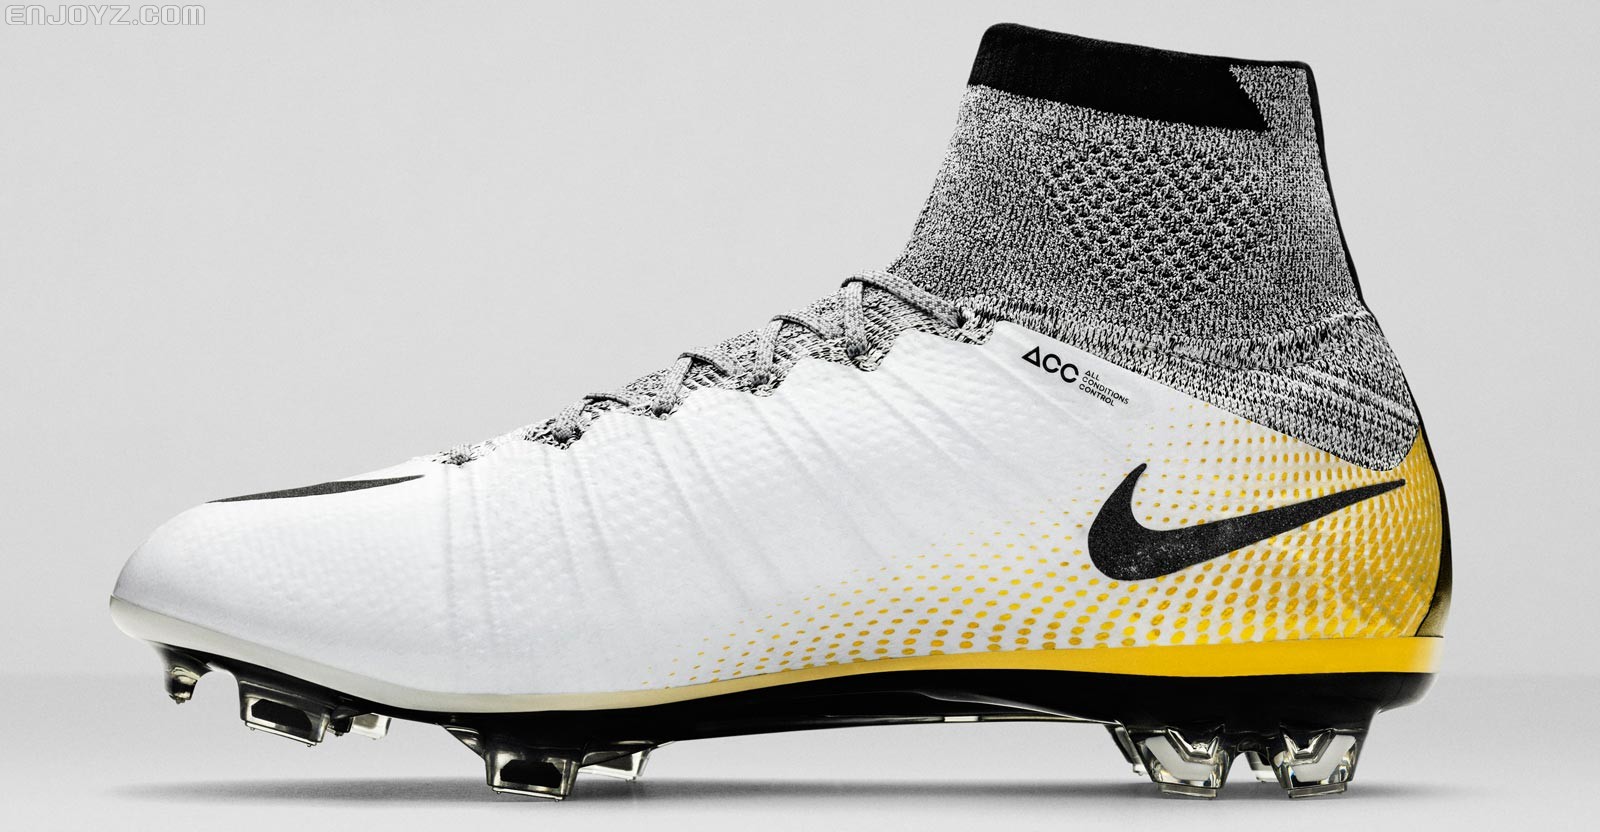 nike-mercurial-superfly-cr7-324k-gold-boots-4.jpg